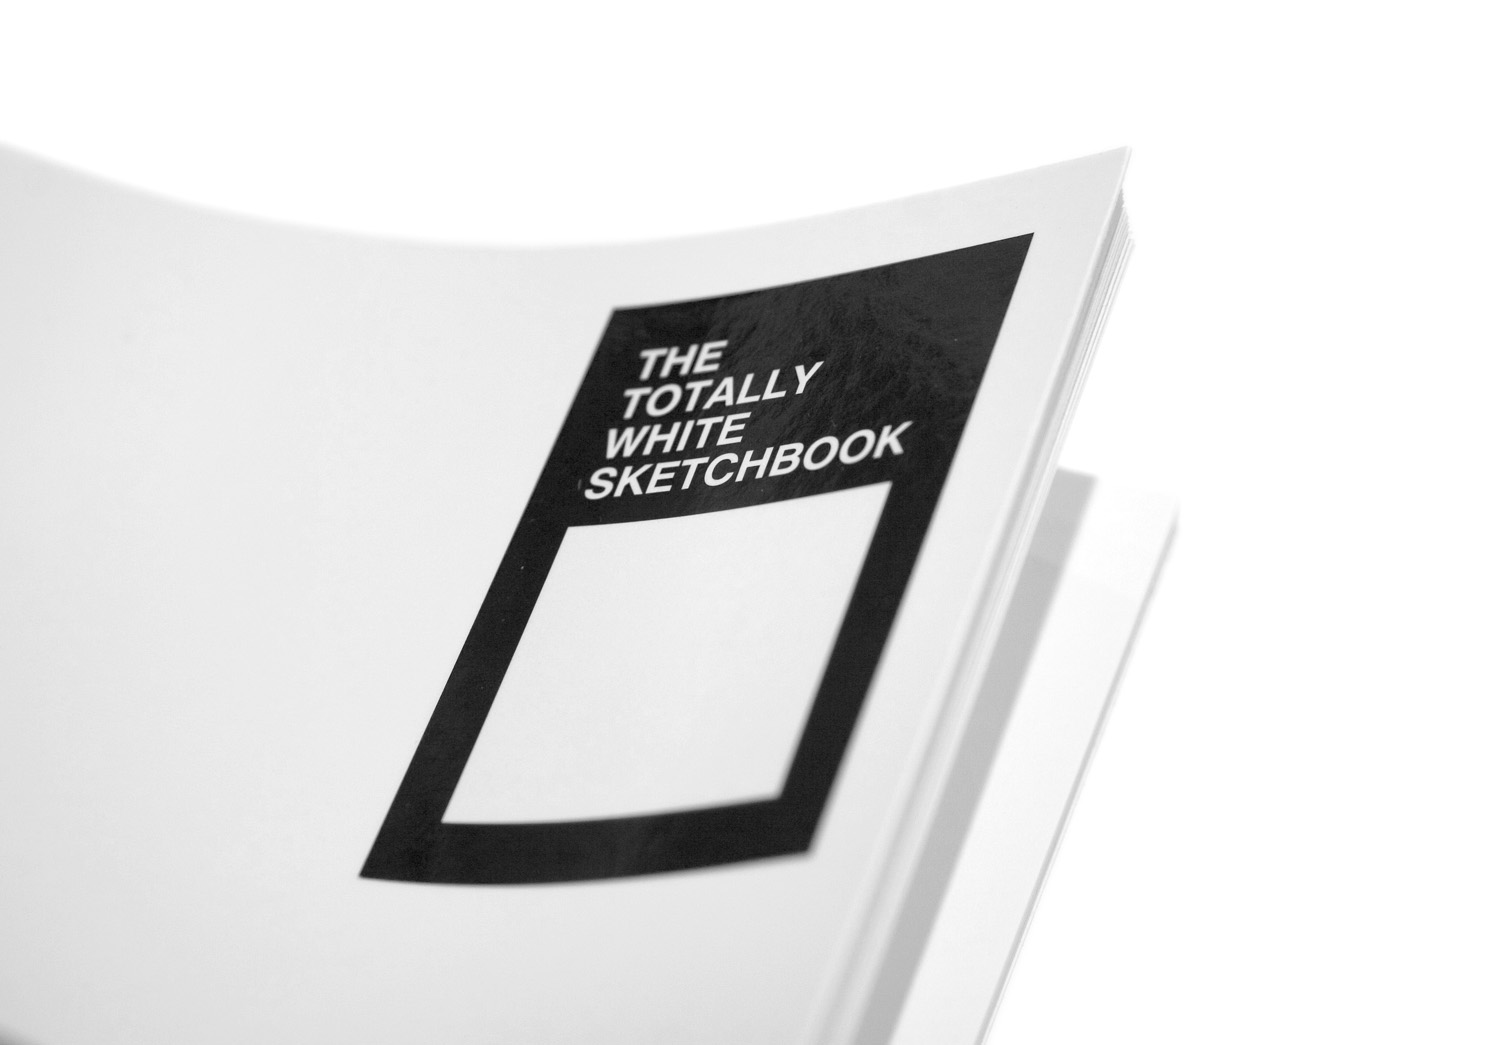 The Totally White Sketchbook